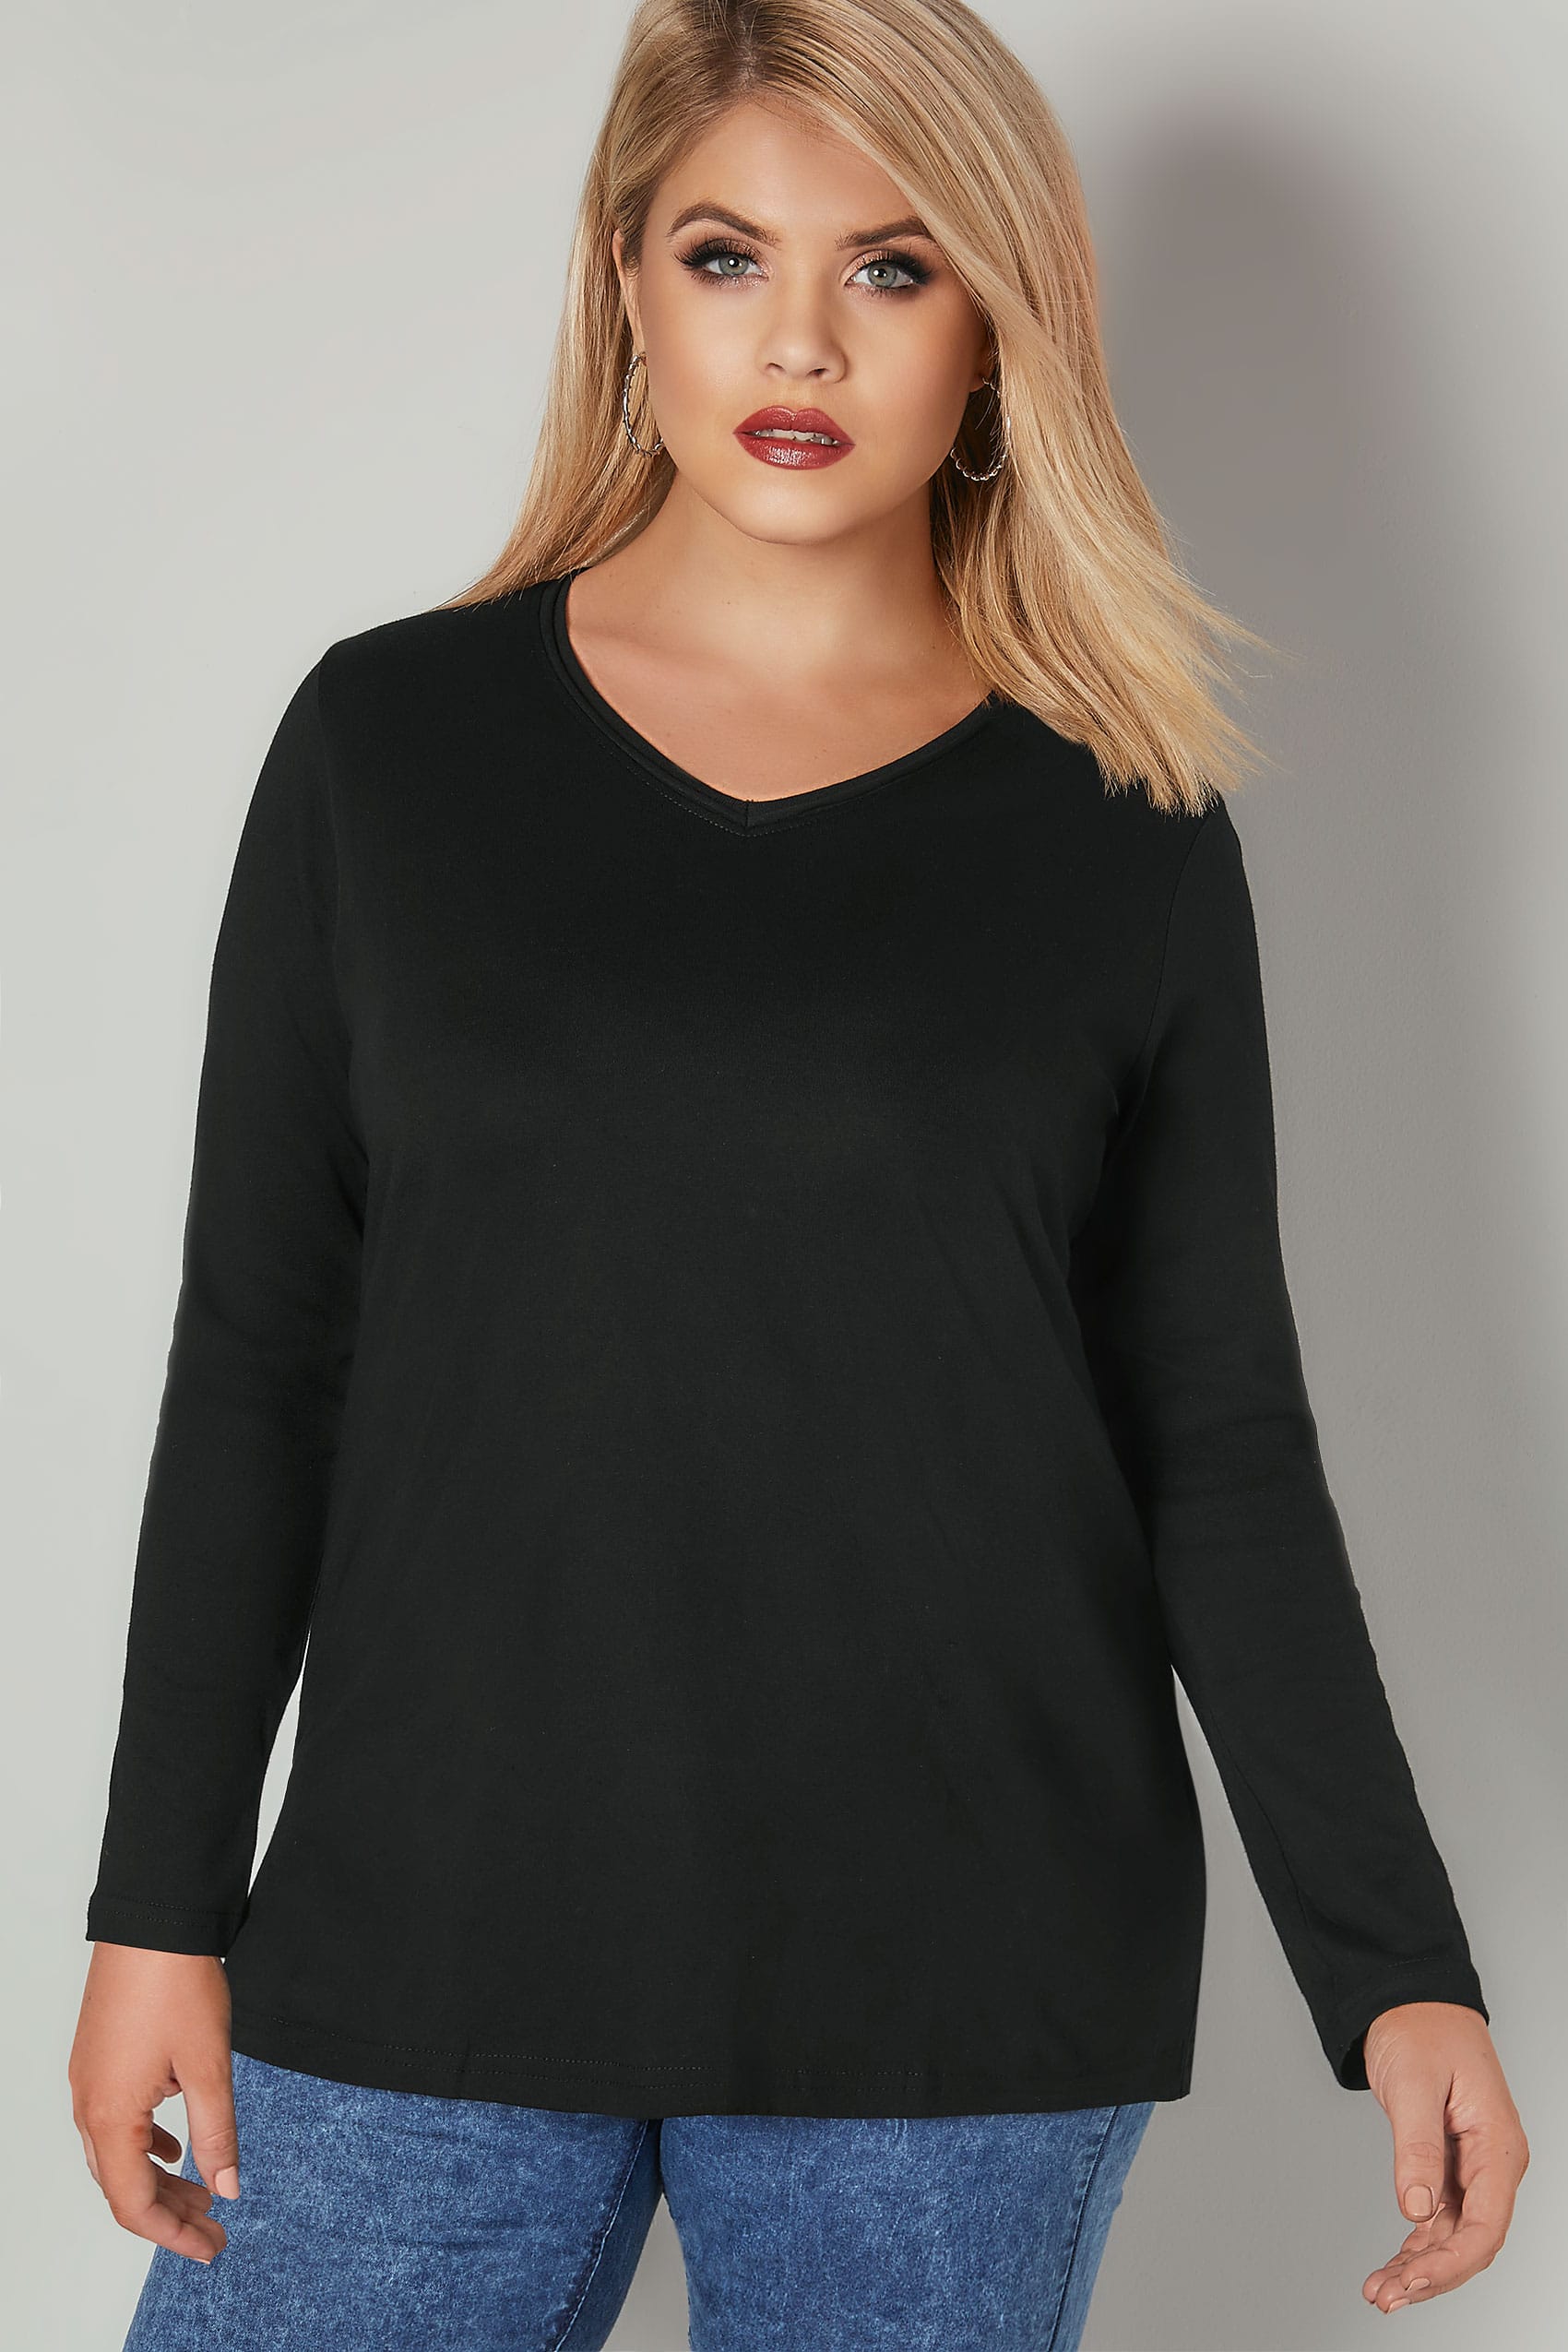 Black Long Sleeved V Neck Jersey Top Plus Size 16 To 36 Yours Clothing